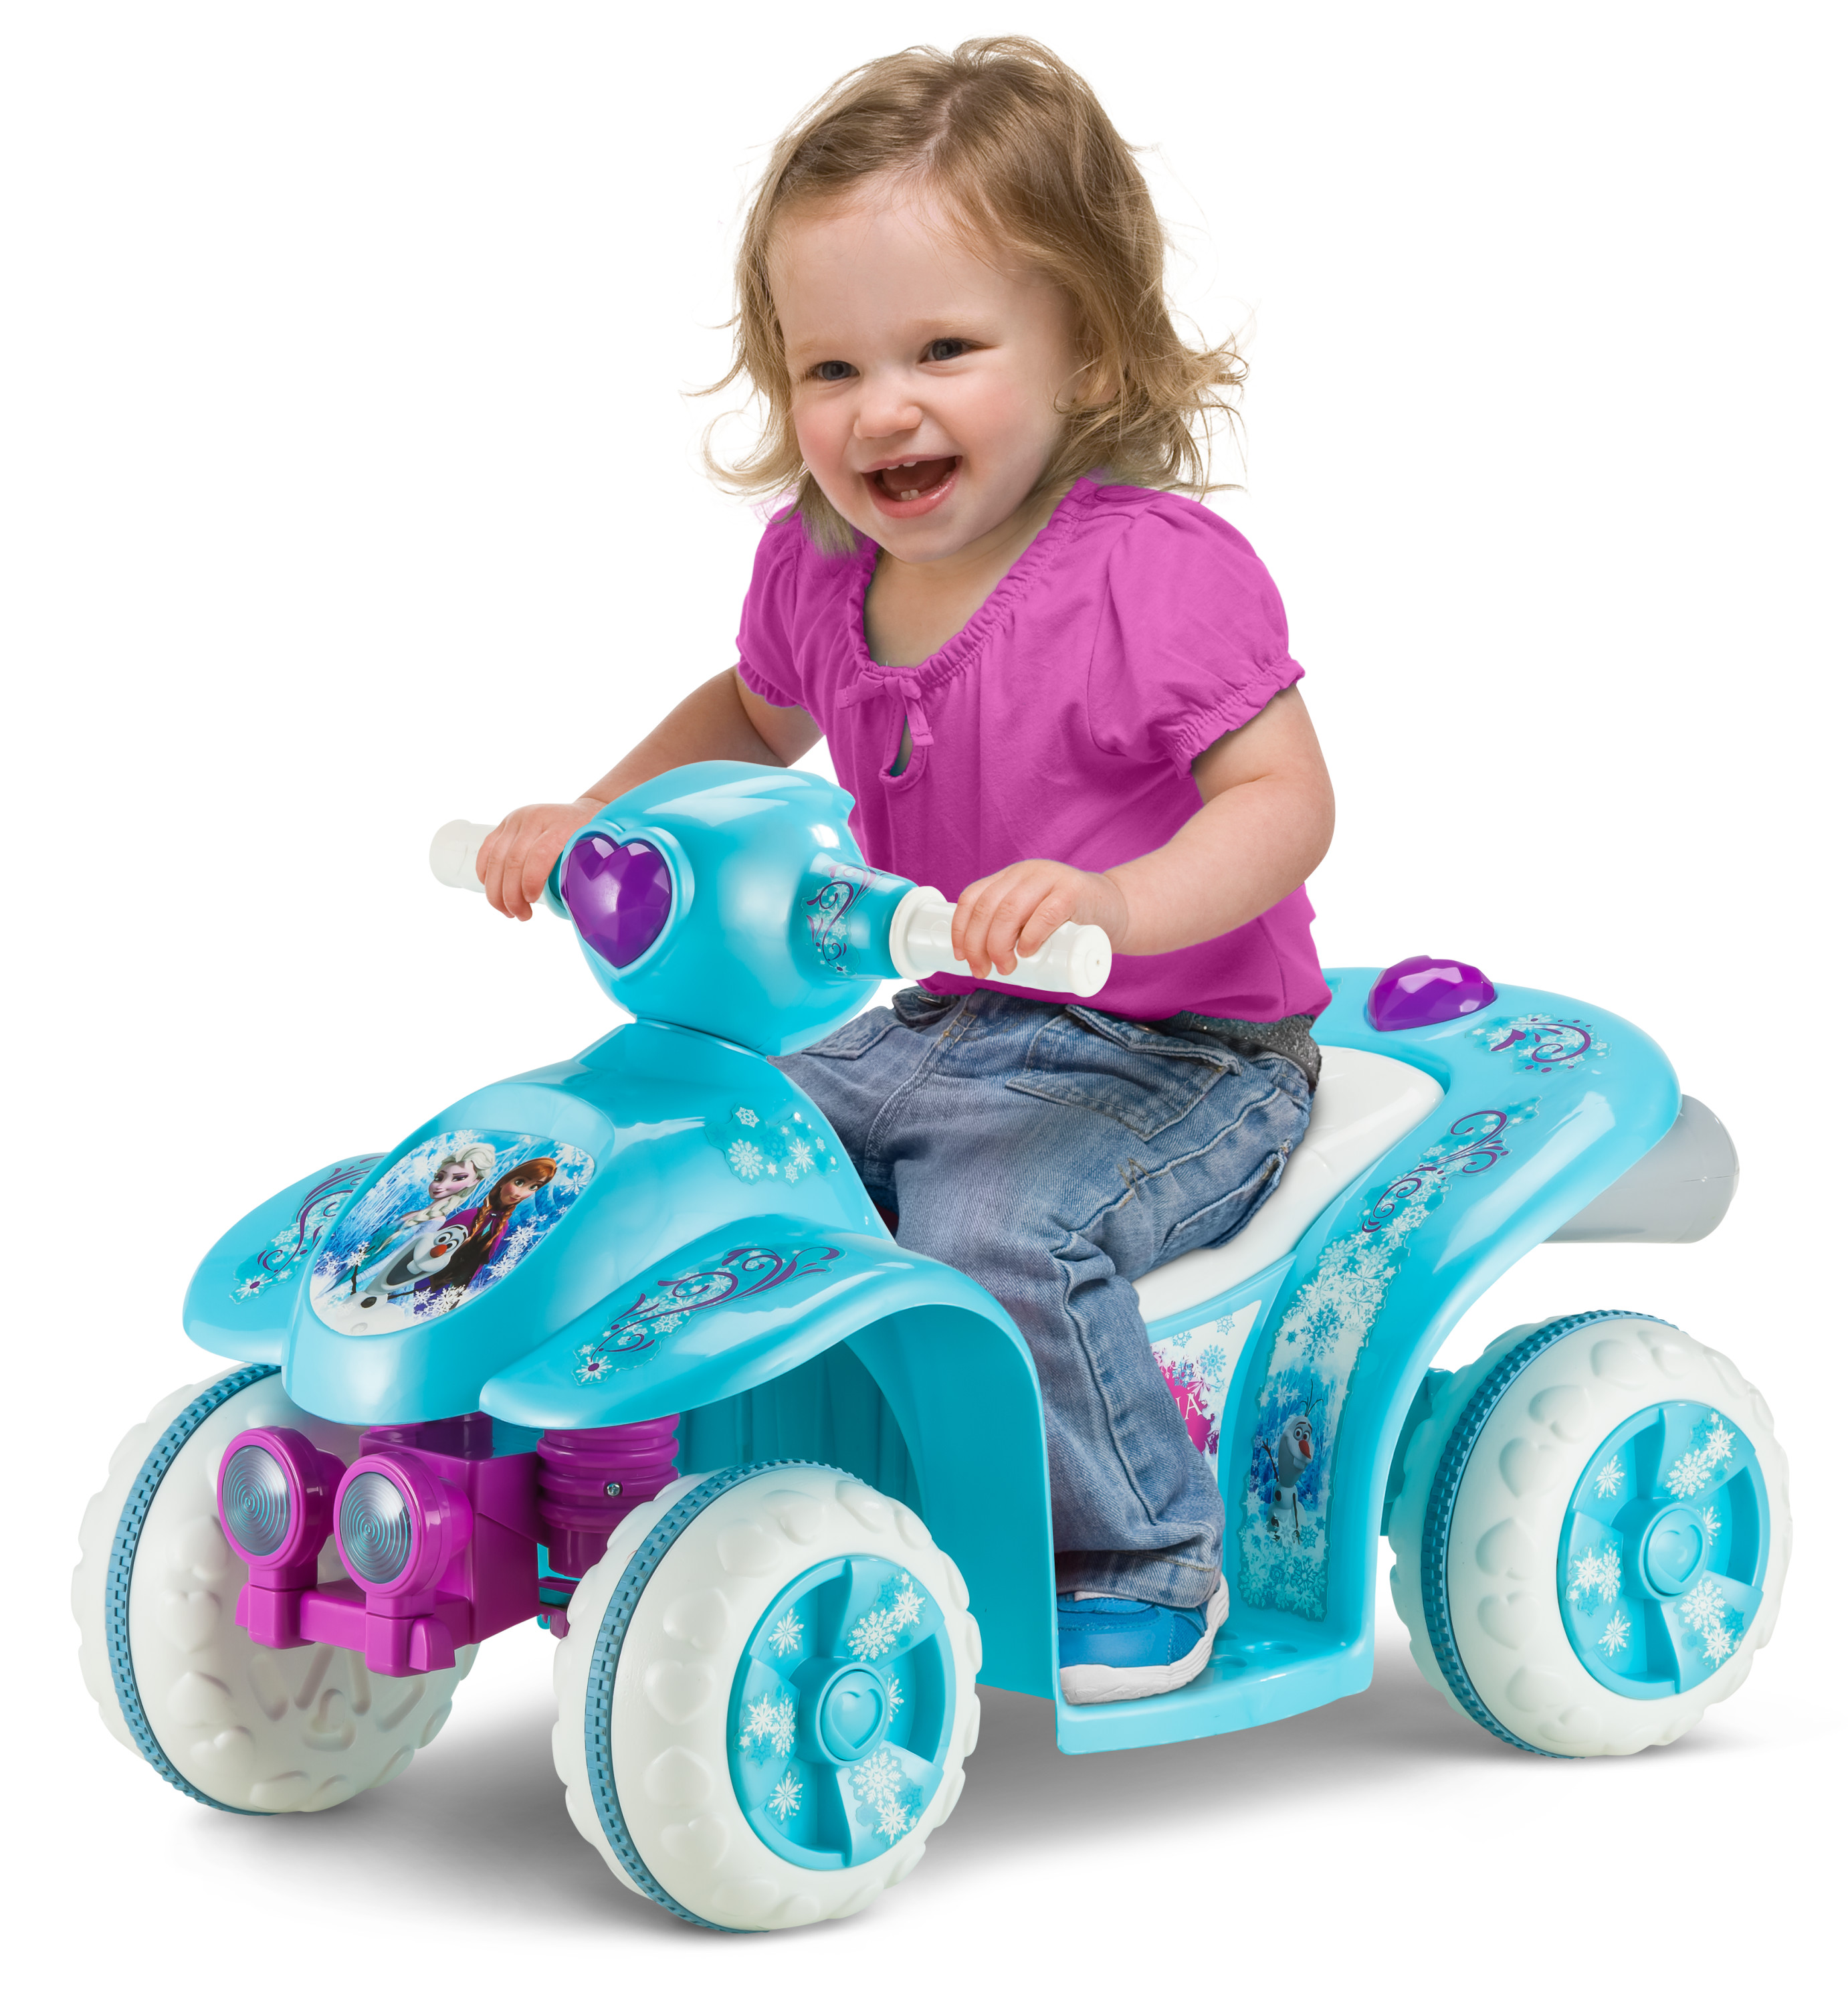 Disney's Frozen Toddler Ride-On Toy by Kid Trax (18- 30 Months) - image 1 of 4